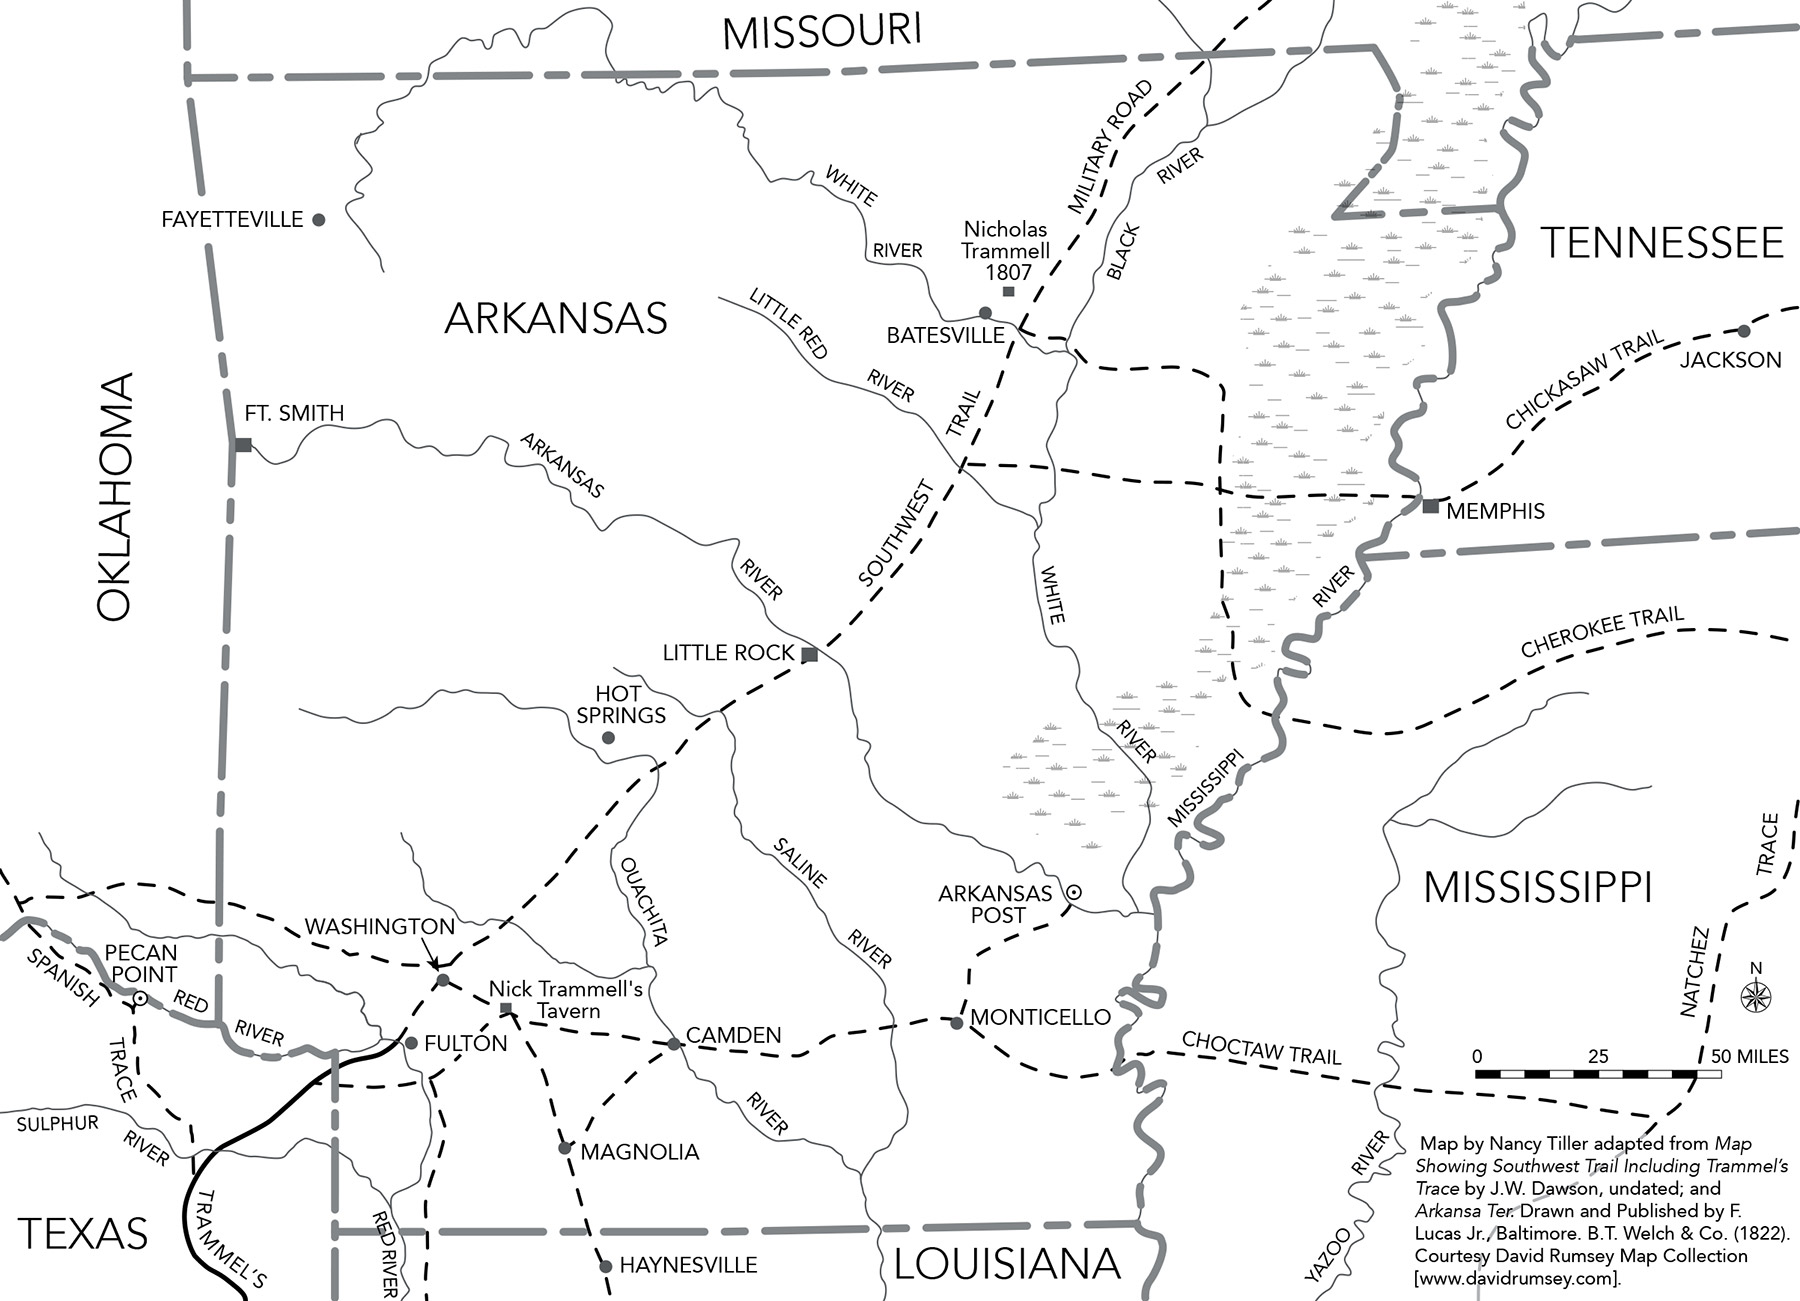 Political map of Arkansas and neighboring states showing historical trail routes with dotted lines